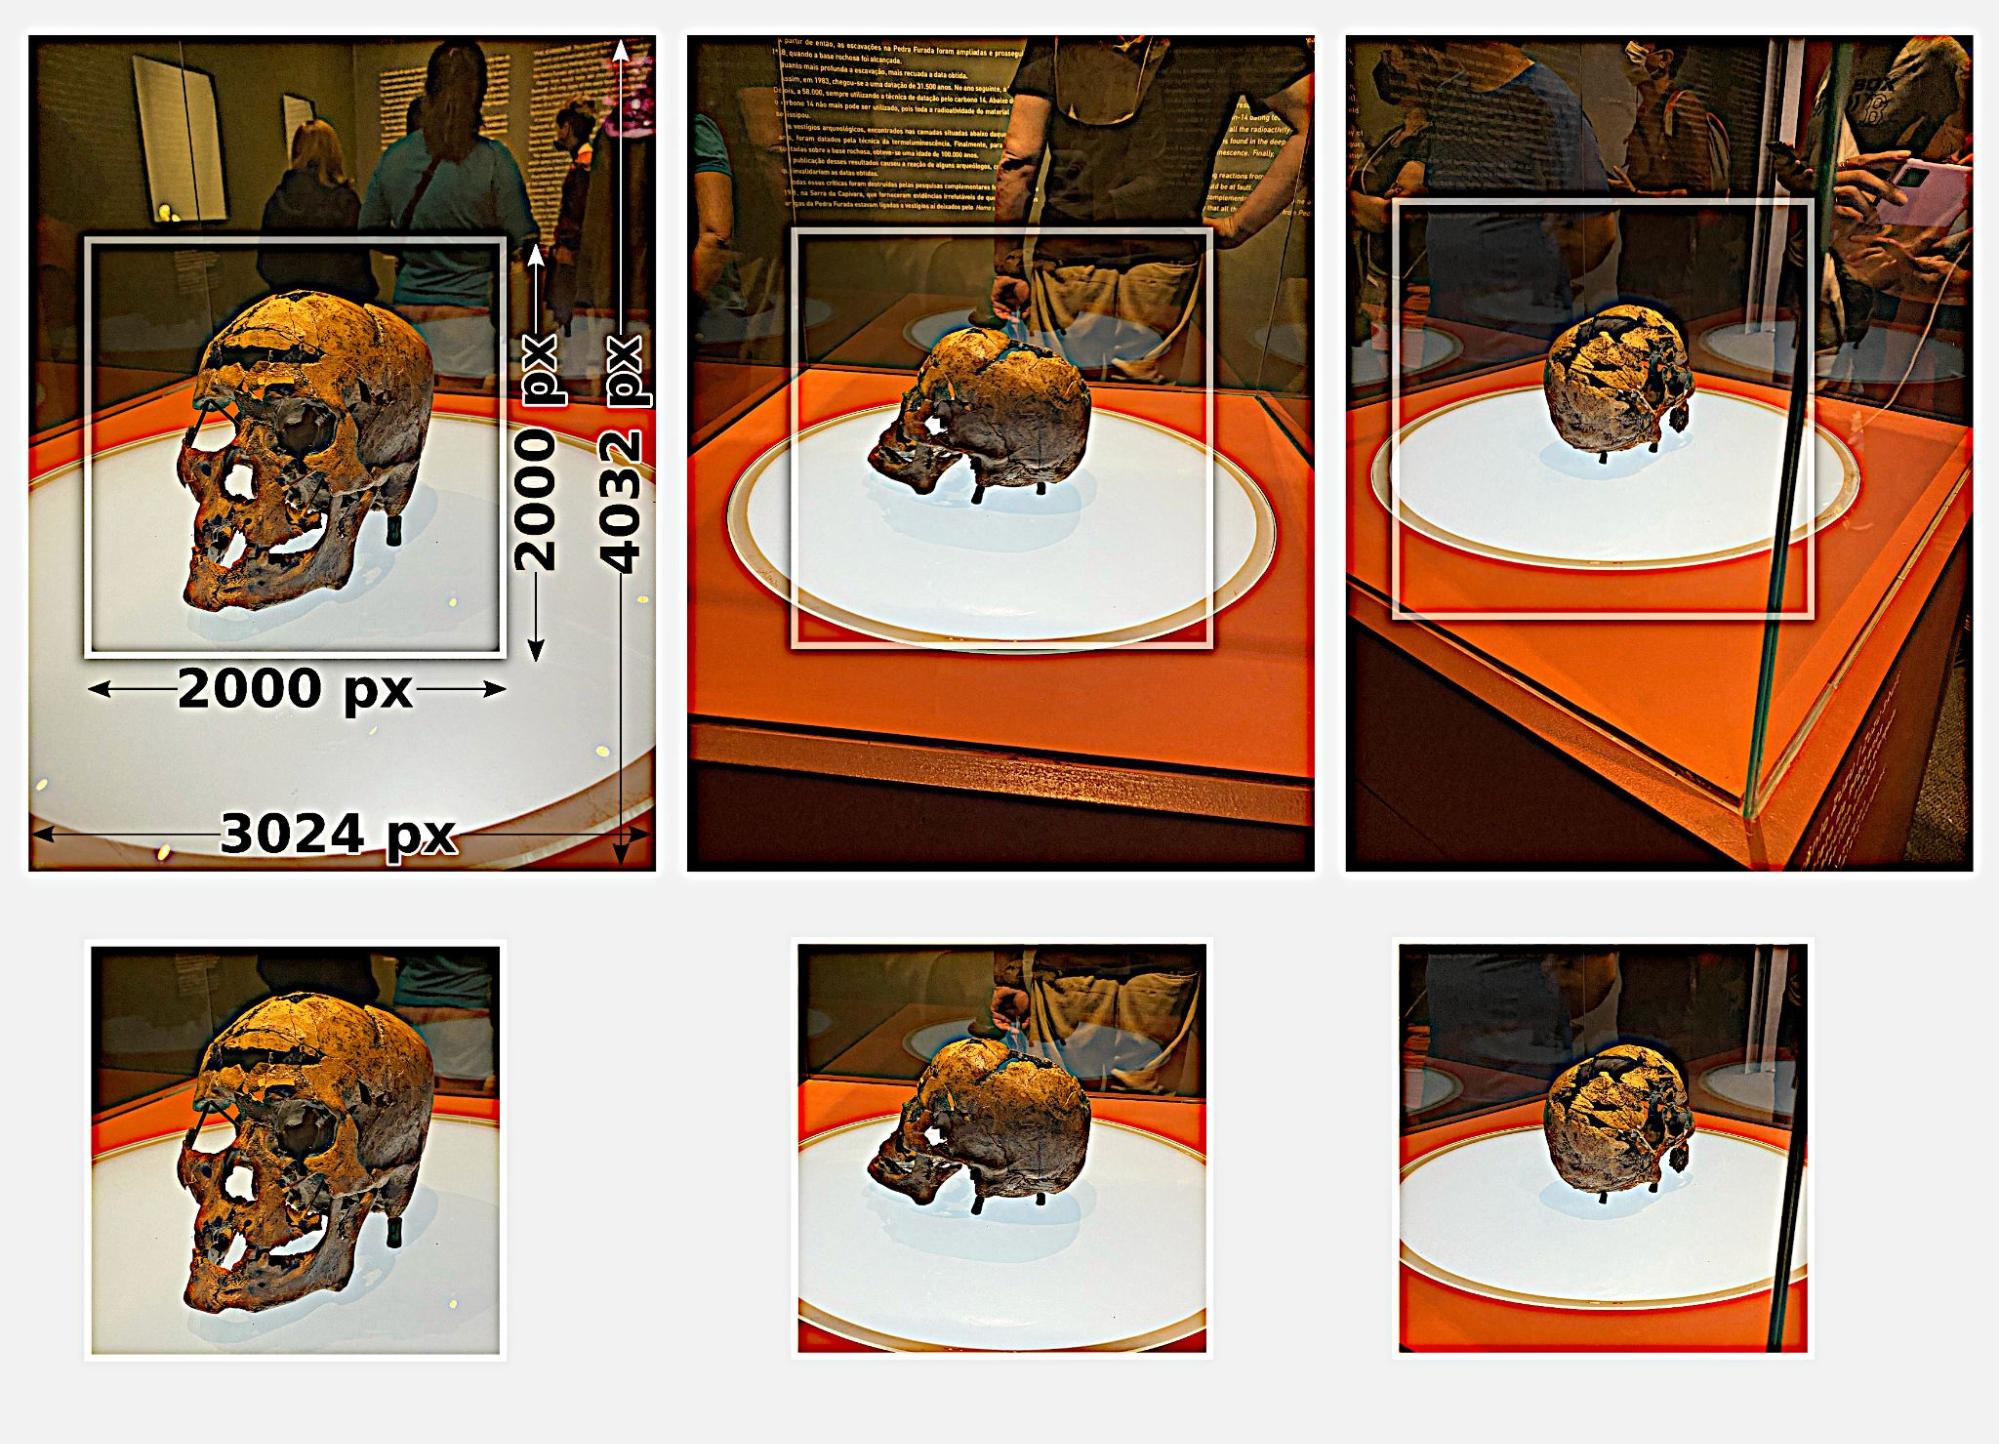 Morphometric affinities and direct radiocarbon dating of the Toca